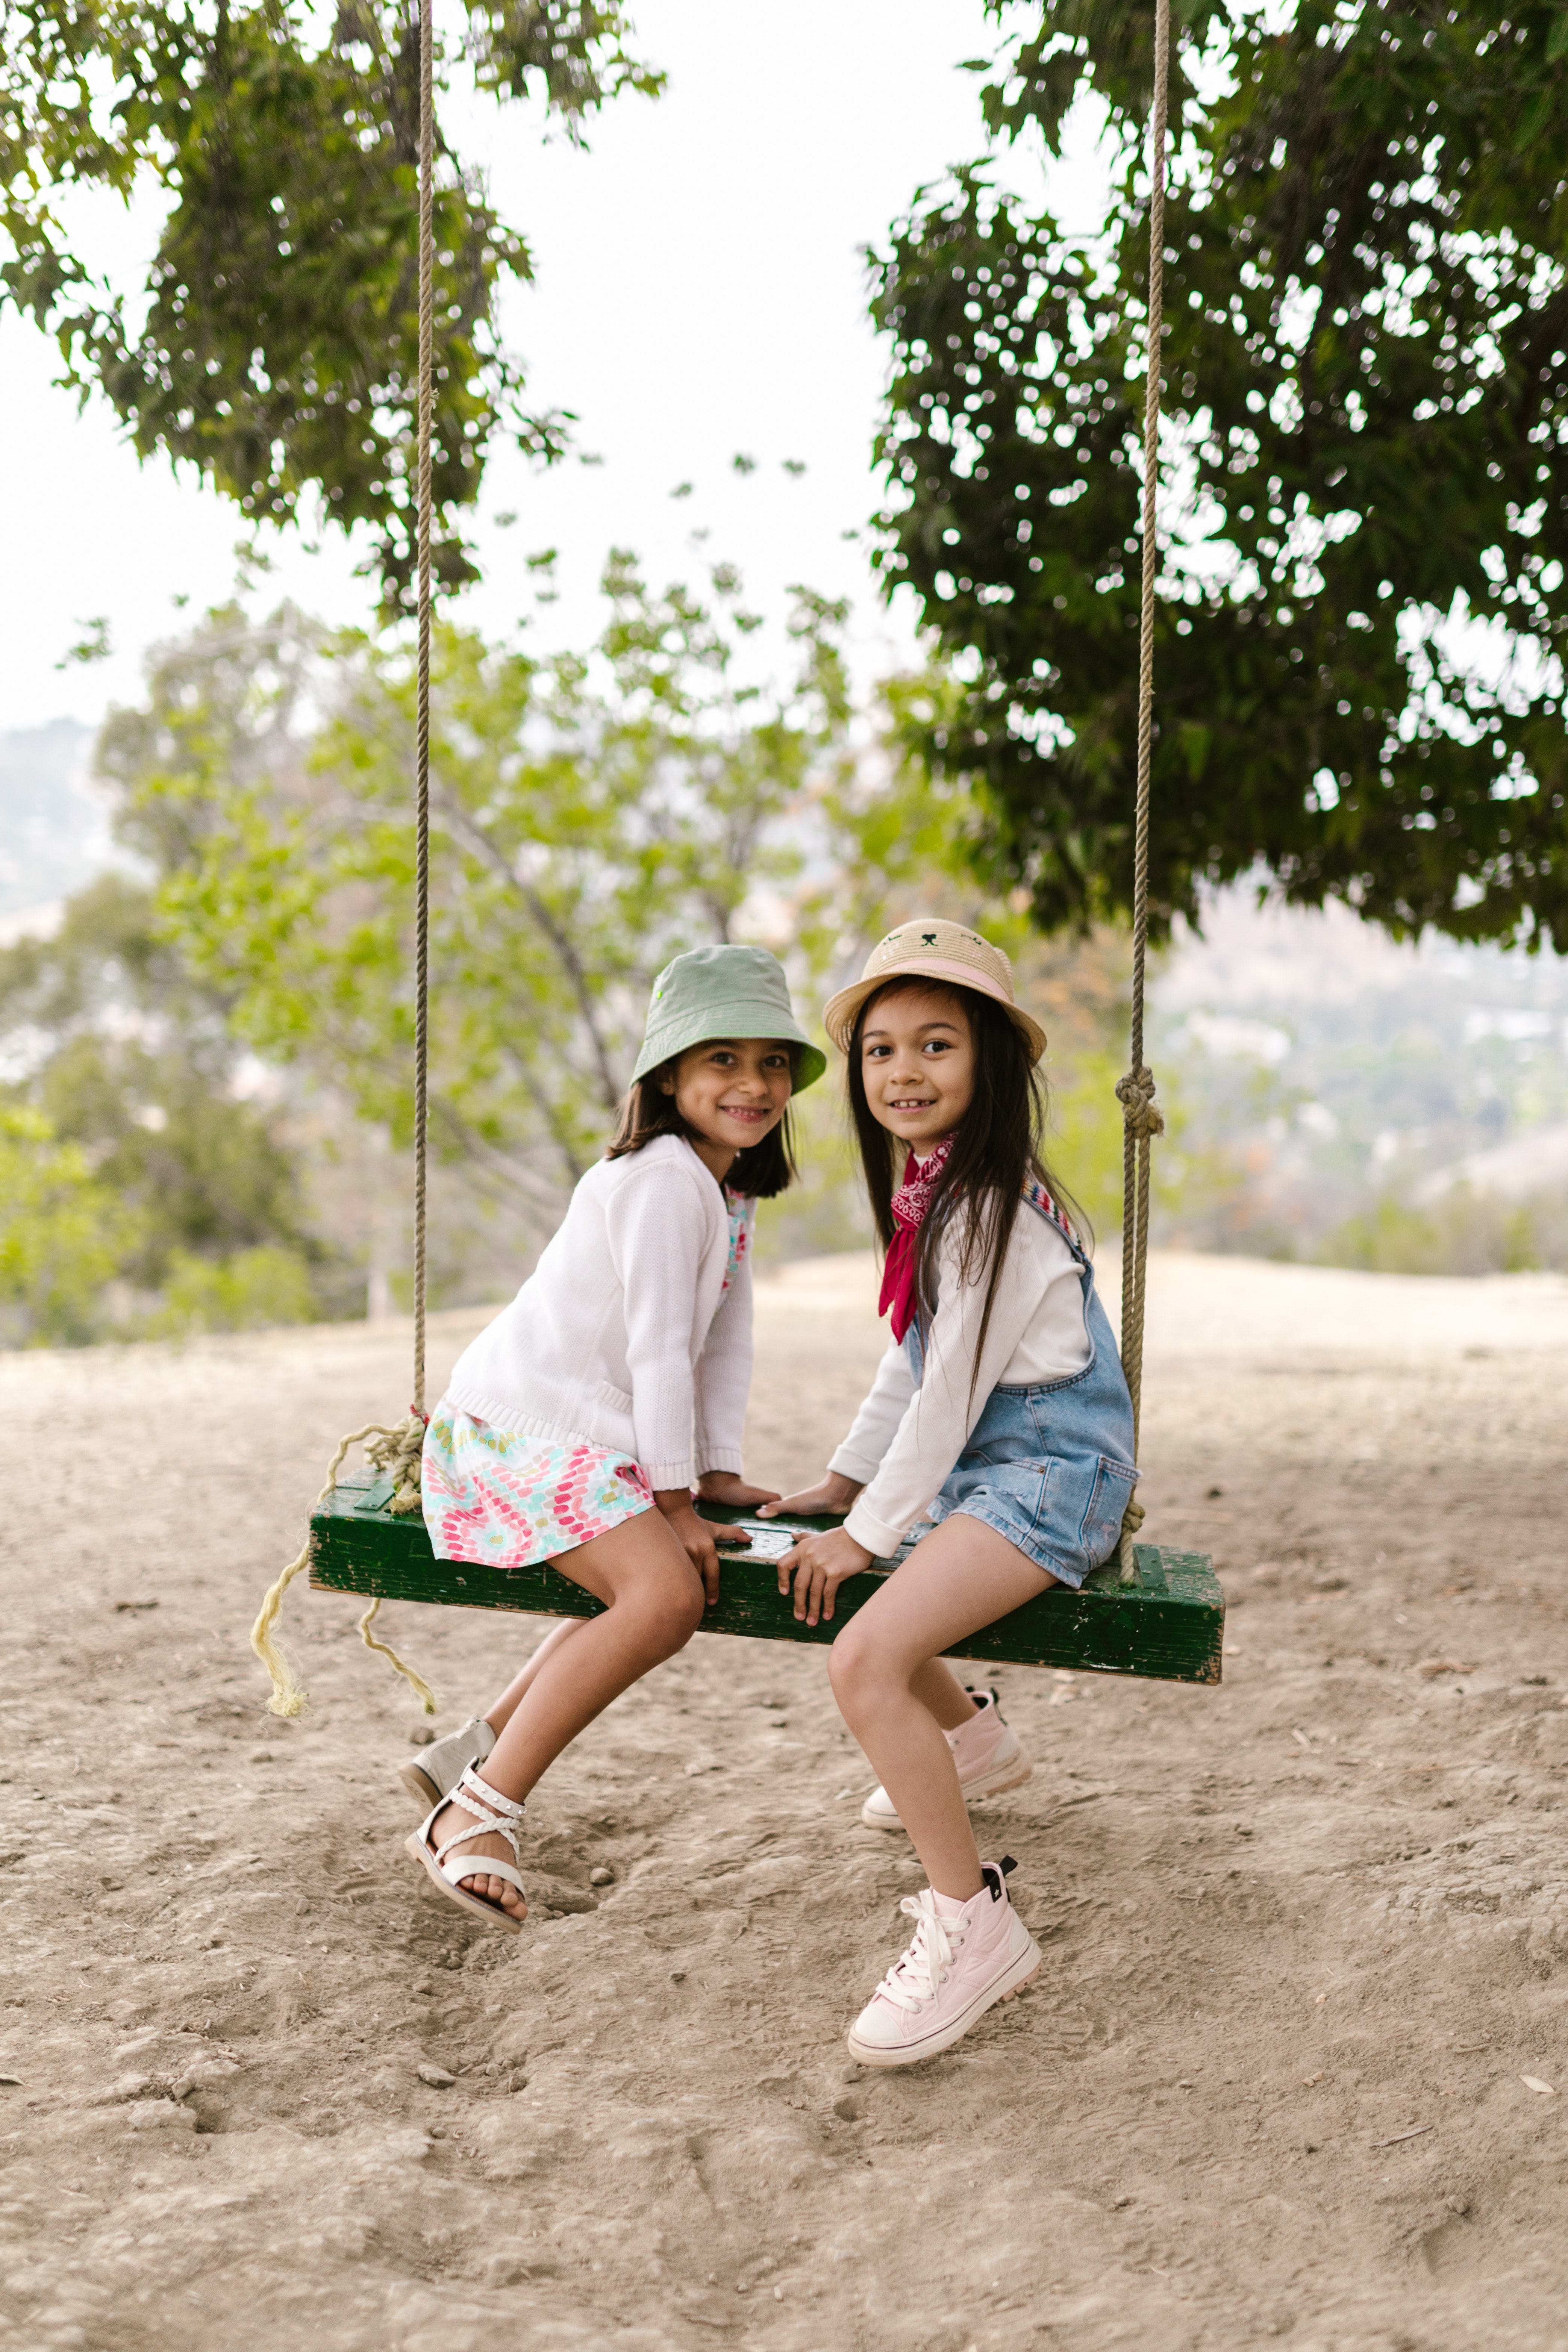 Two girls sharing a swing | Source: Pexels